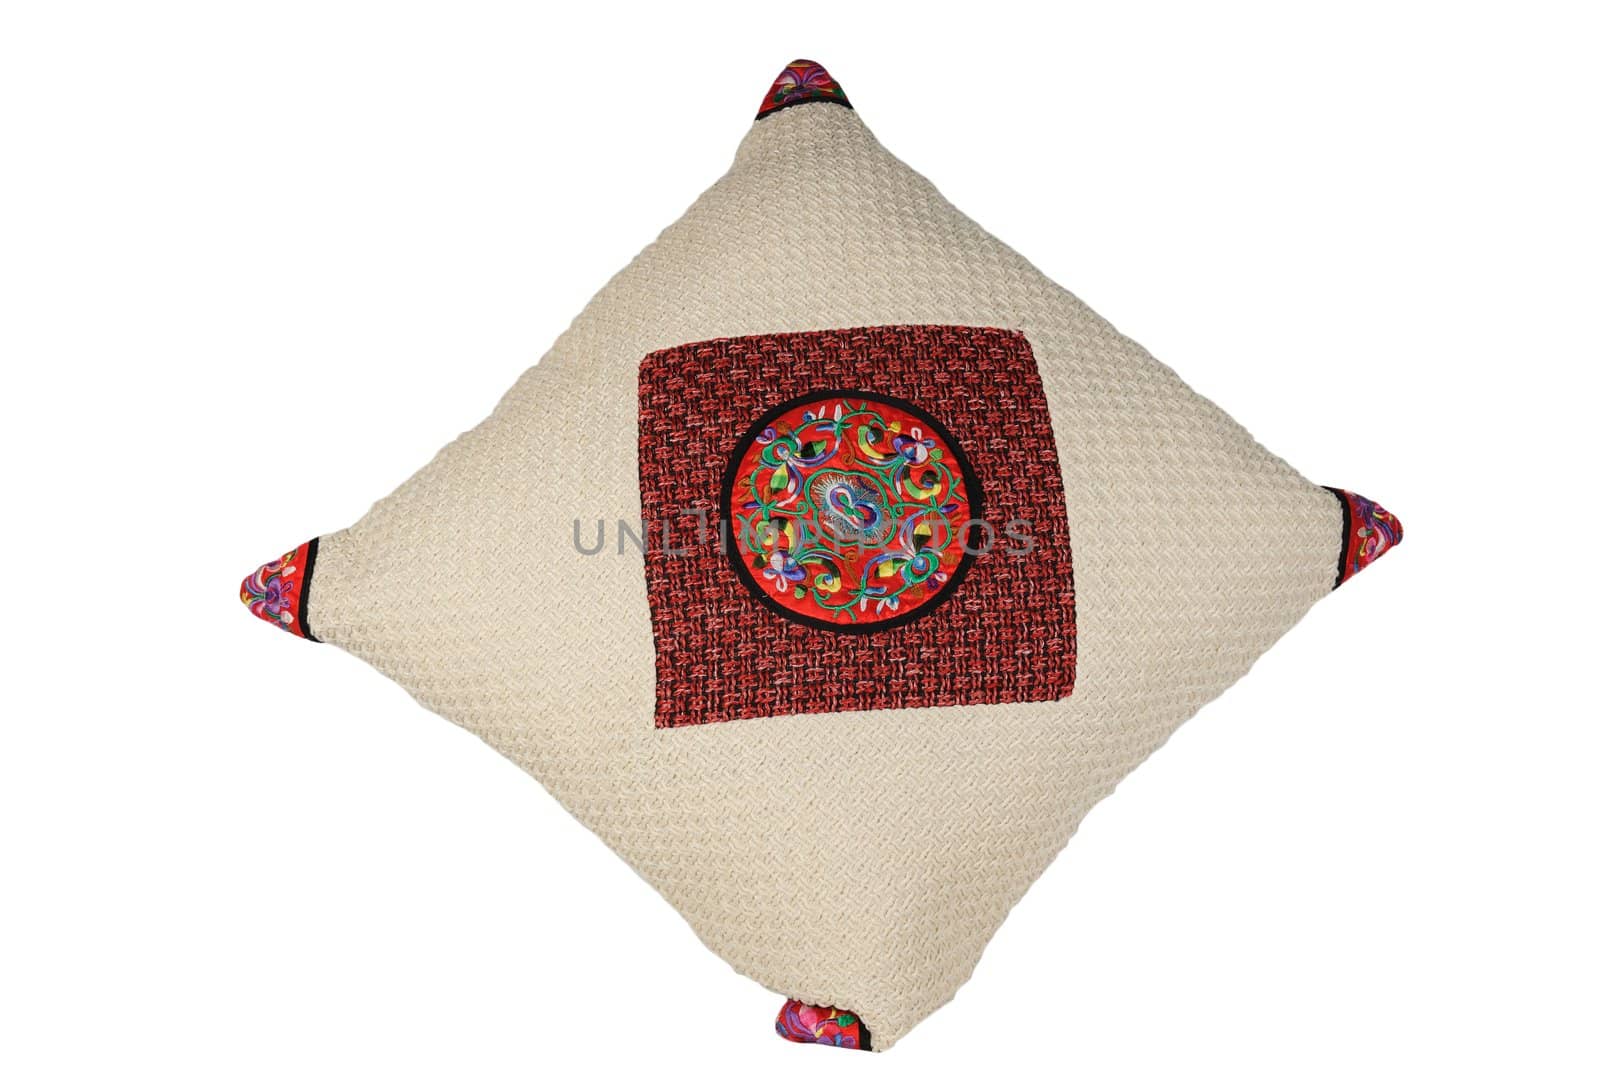 Chinese traditional pillow isolated on white background